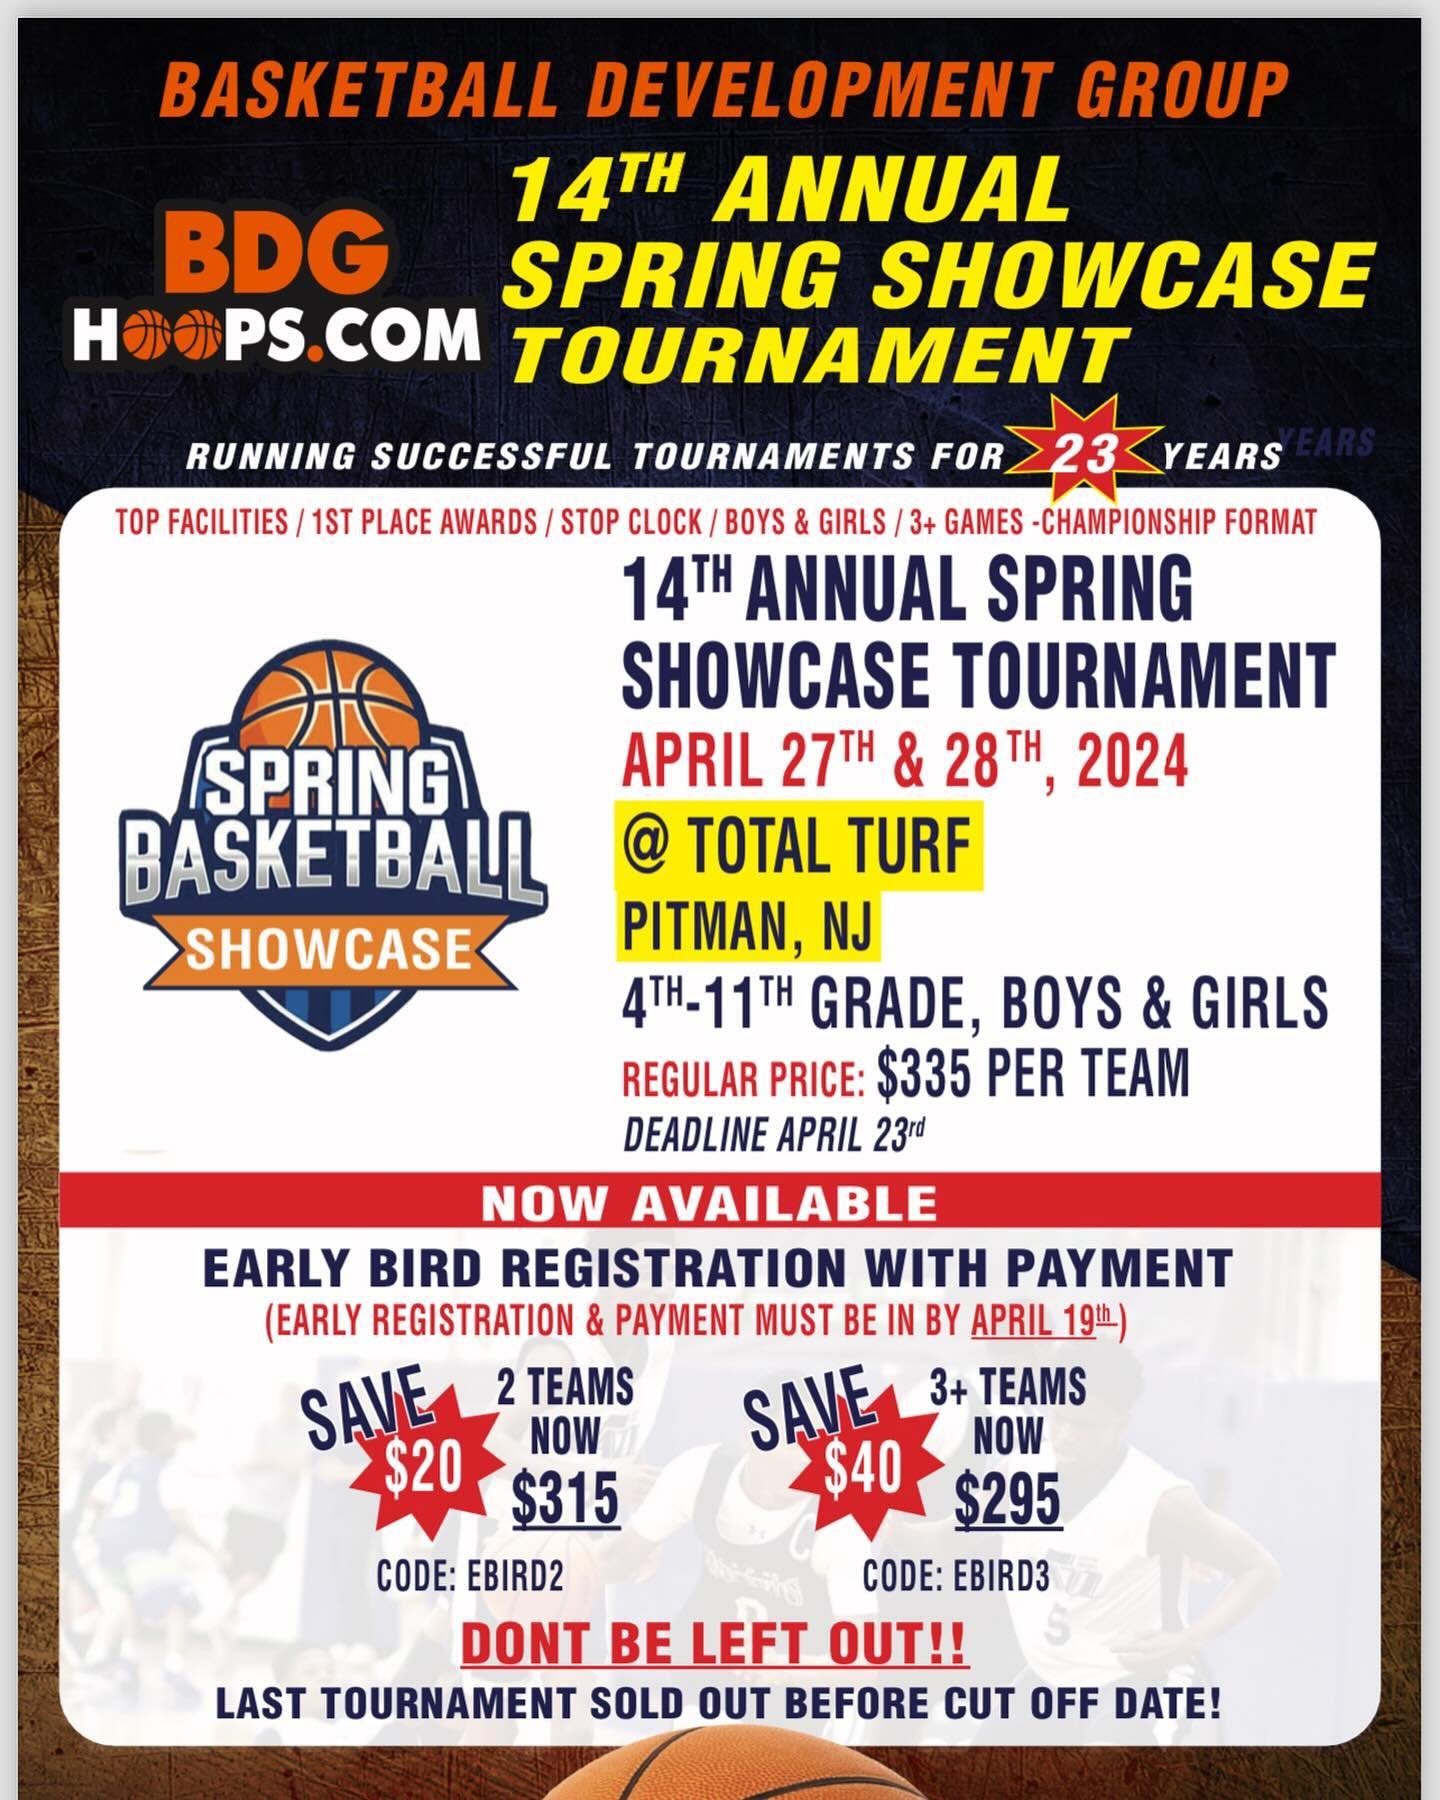 🔥LAST CALL🔥REGISTER NOW AT WWW.BDGHOOPS.COM!